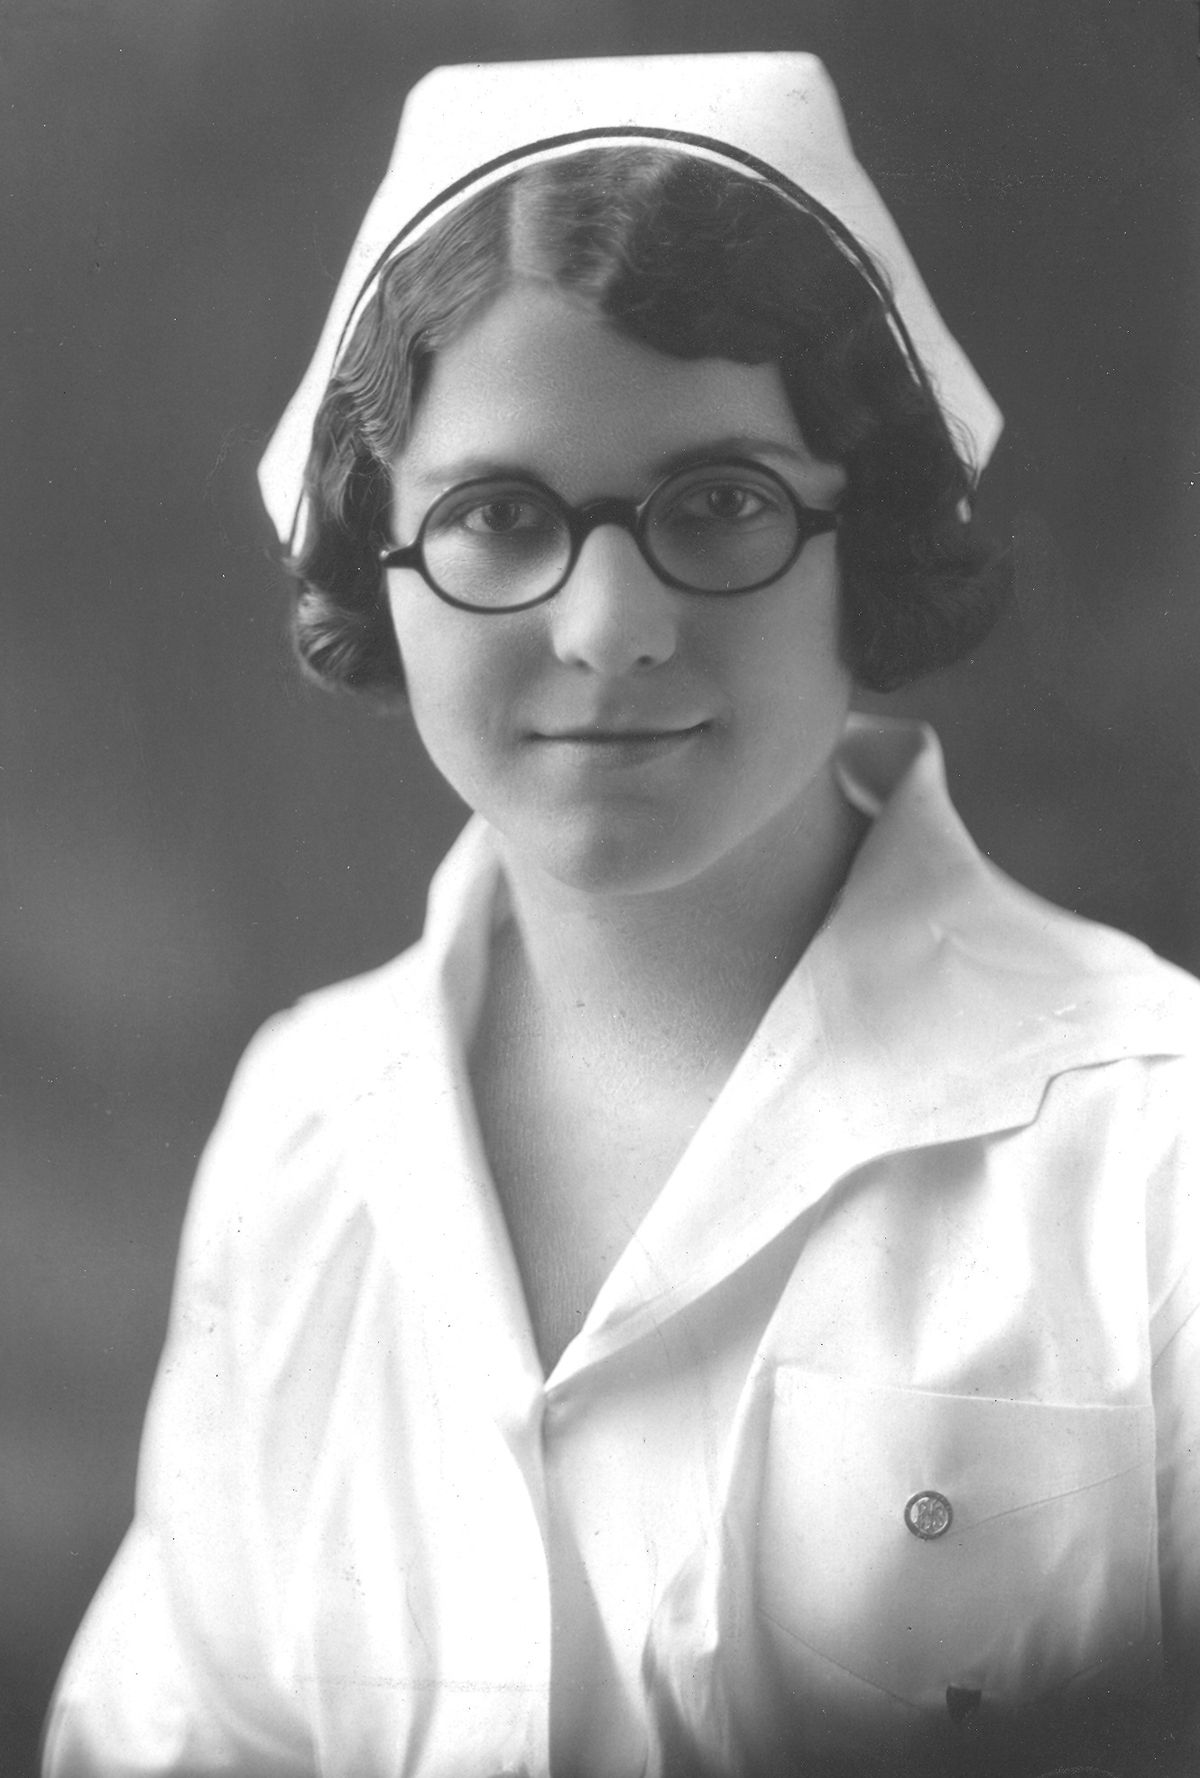 At left, a Spokane nursing student wears a pin on her uniform, but it’s too tiny to tell whether she earned her degree at Sacred Heart or Deaconess nursing school. Her hair is styled in a “finger wave” popular in the 1920s and 1930s. Both hospitals had schools in those decades.